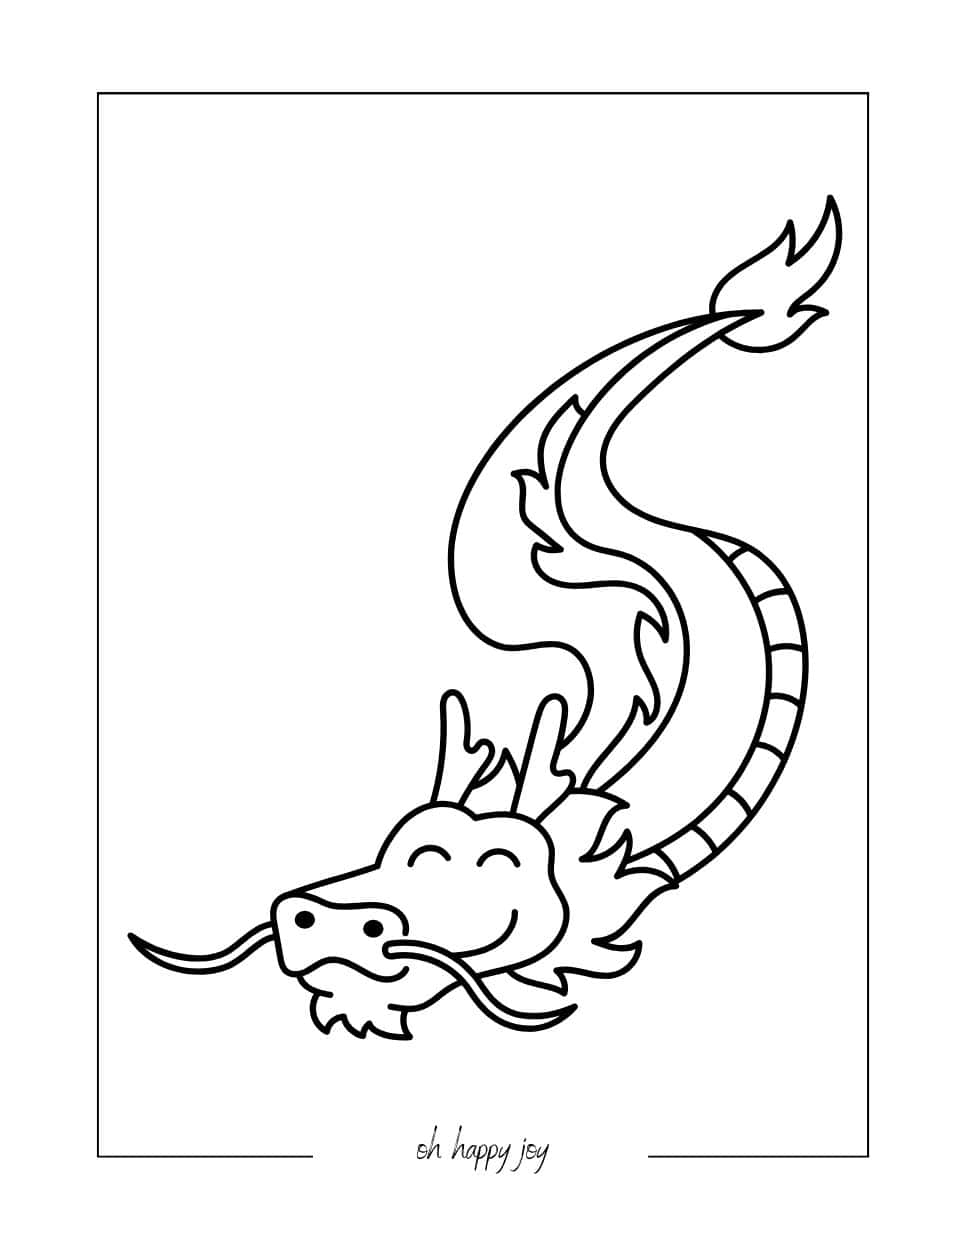 Whisker Dragon Coloring Page